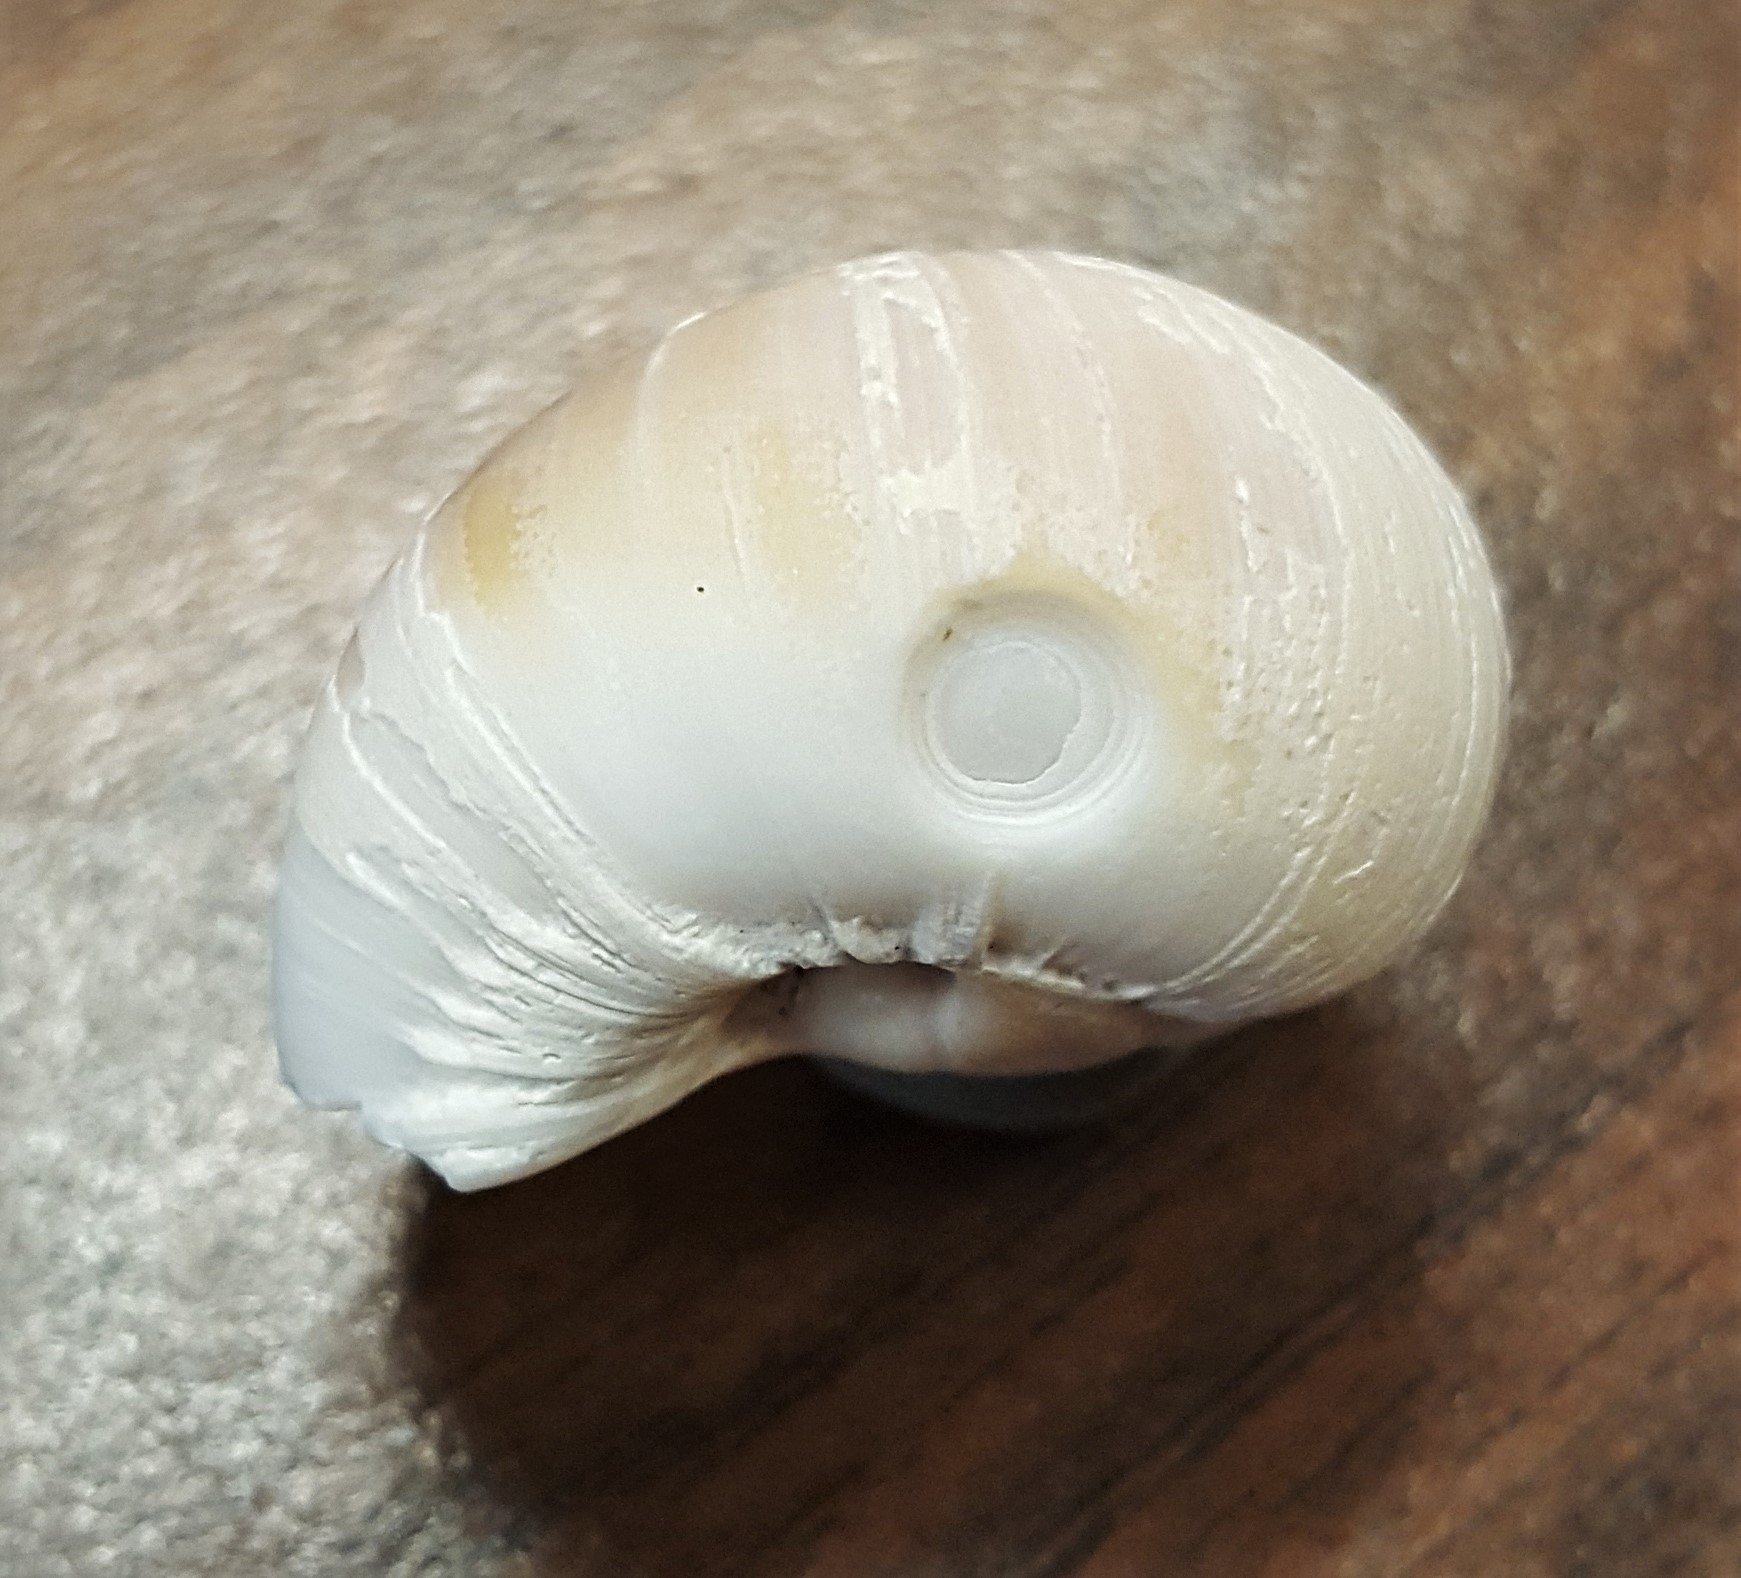 gastropod with an incomplete drill hole (beveling does not pierce entire shell).